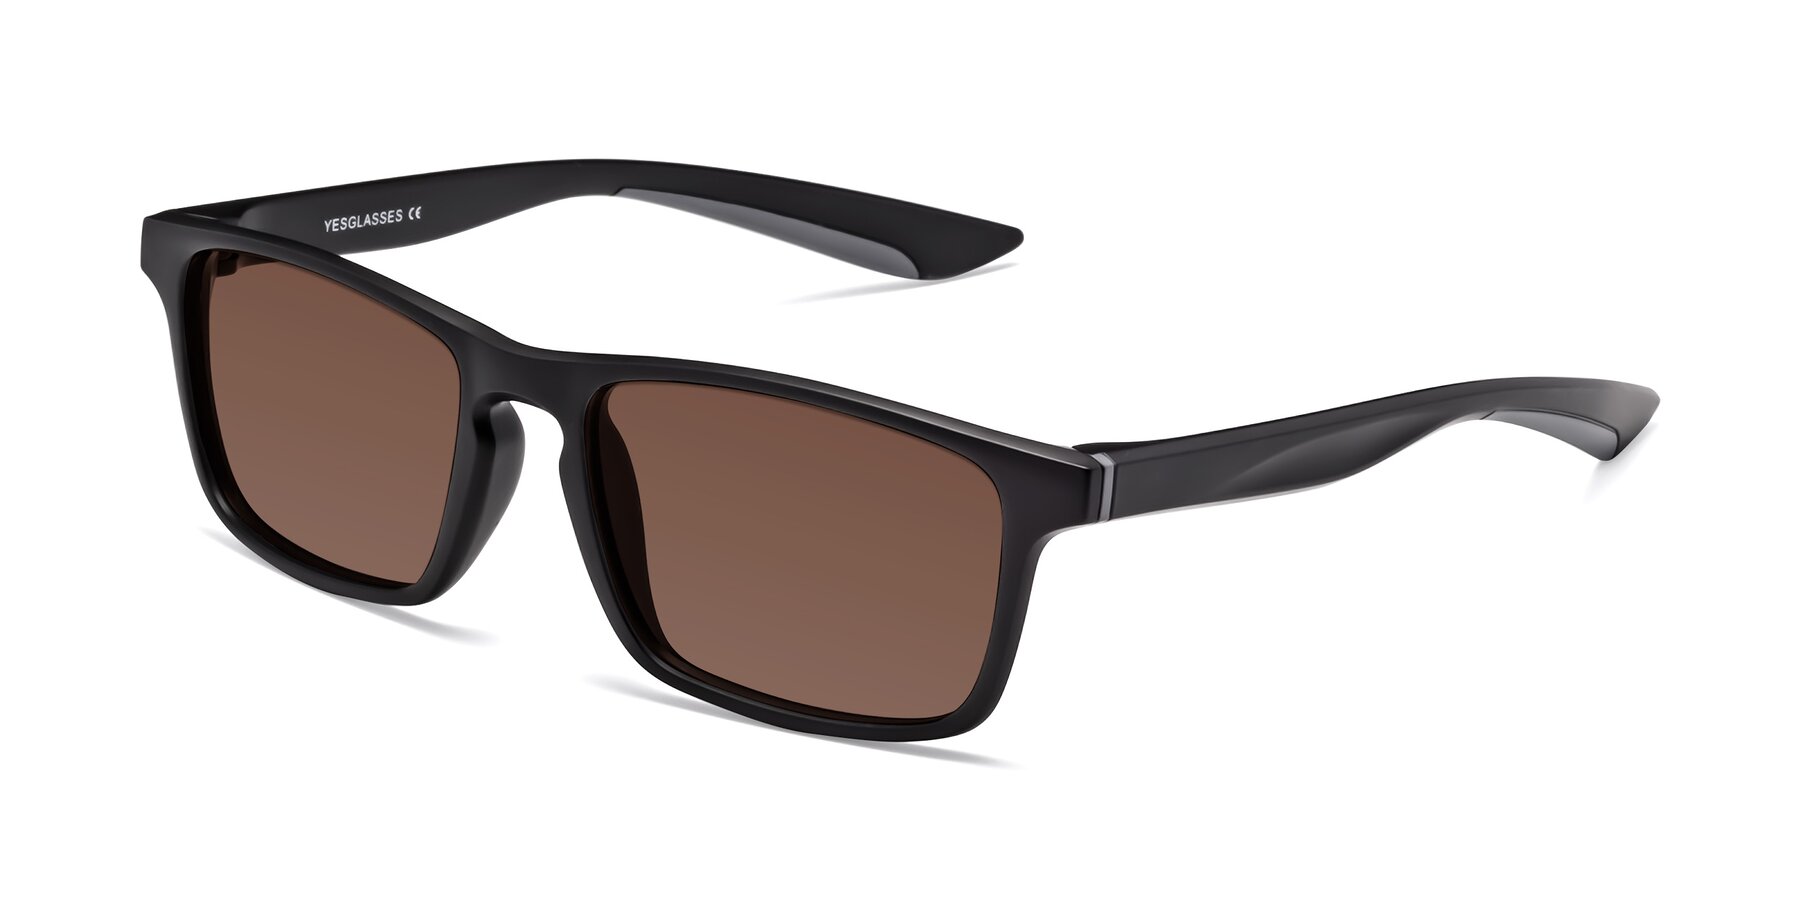 Angle of Passion in Matte Black-Gray with Brown Tinted Lenses